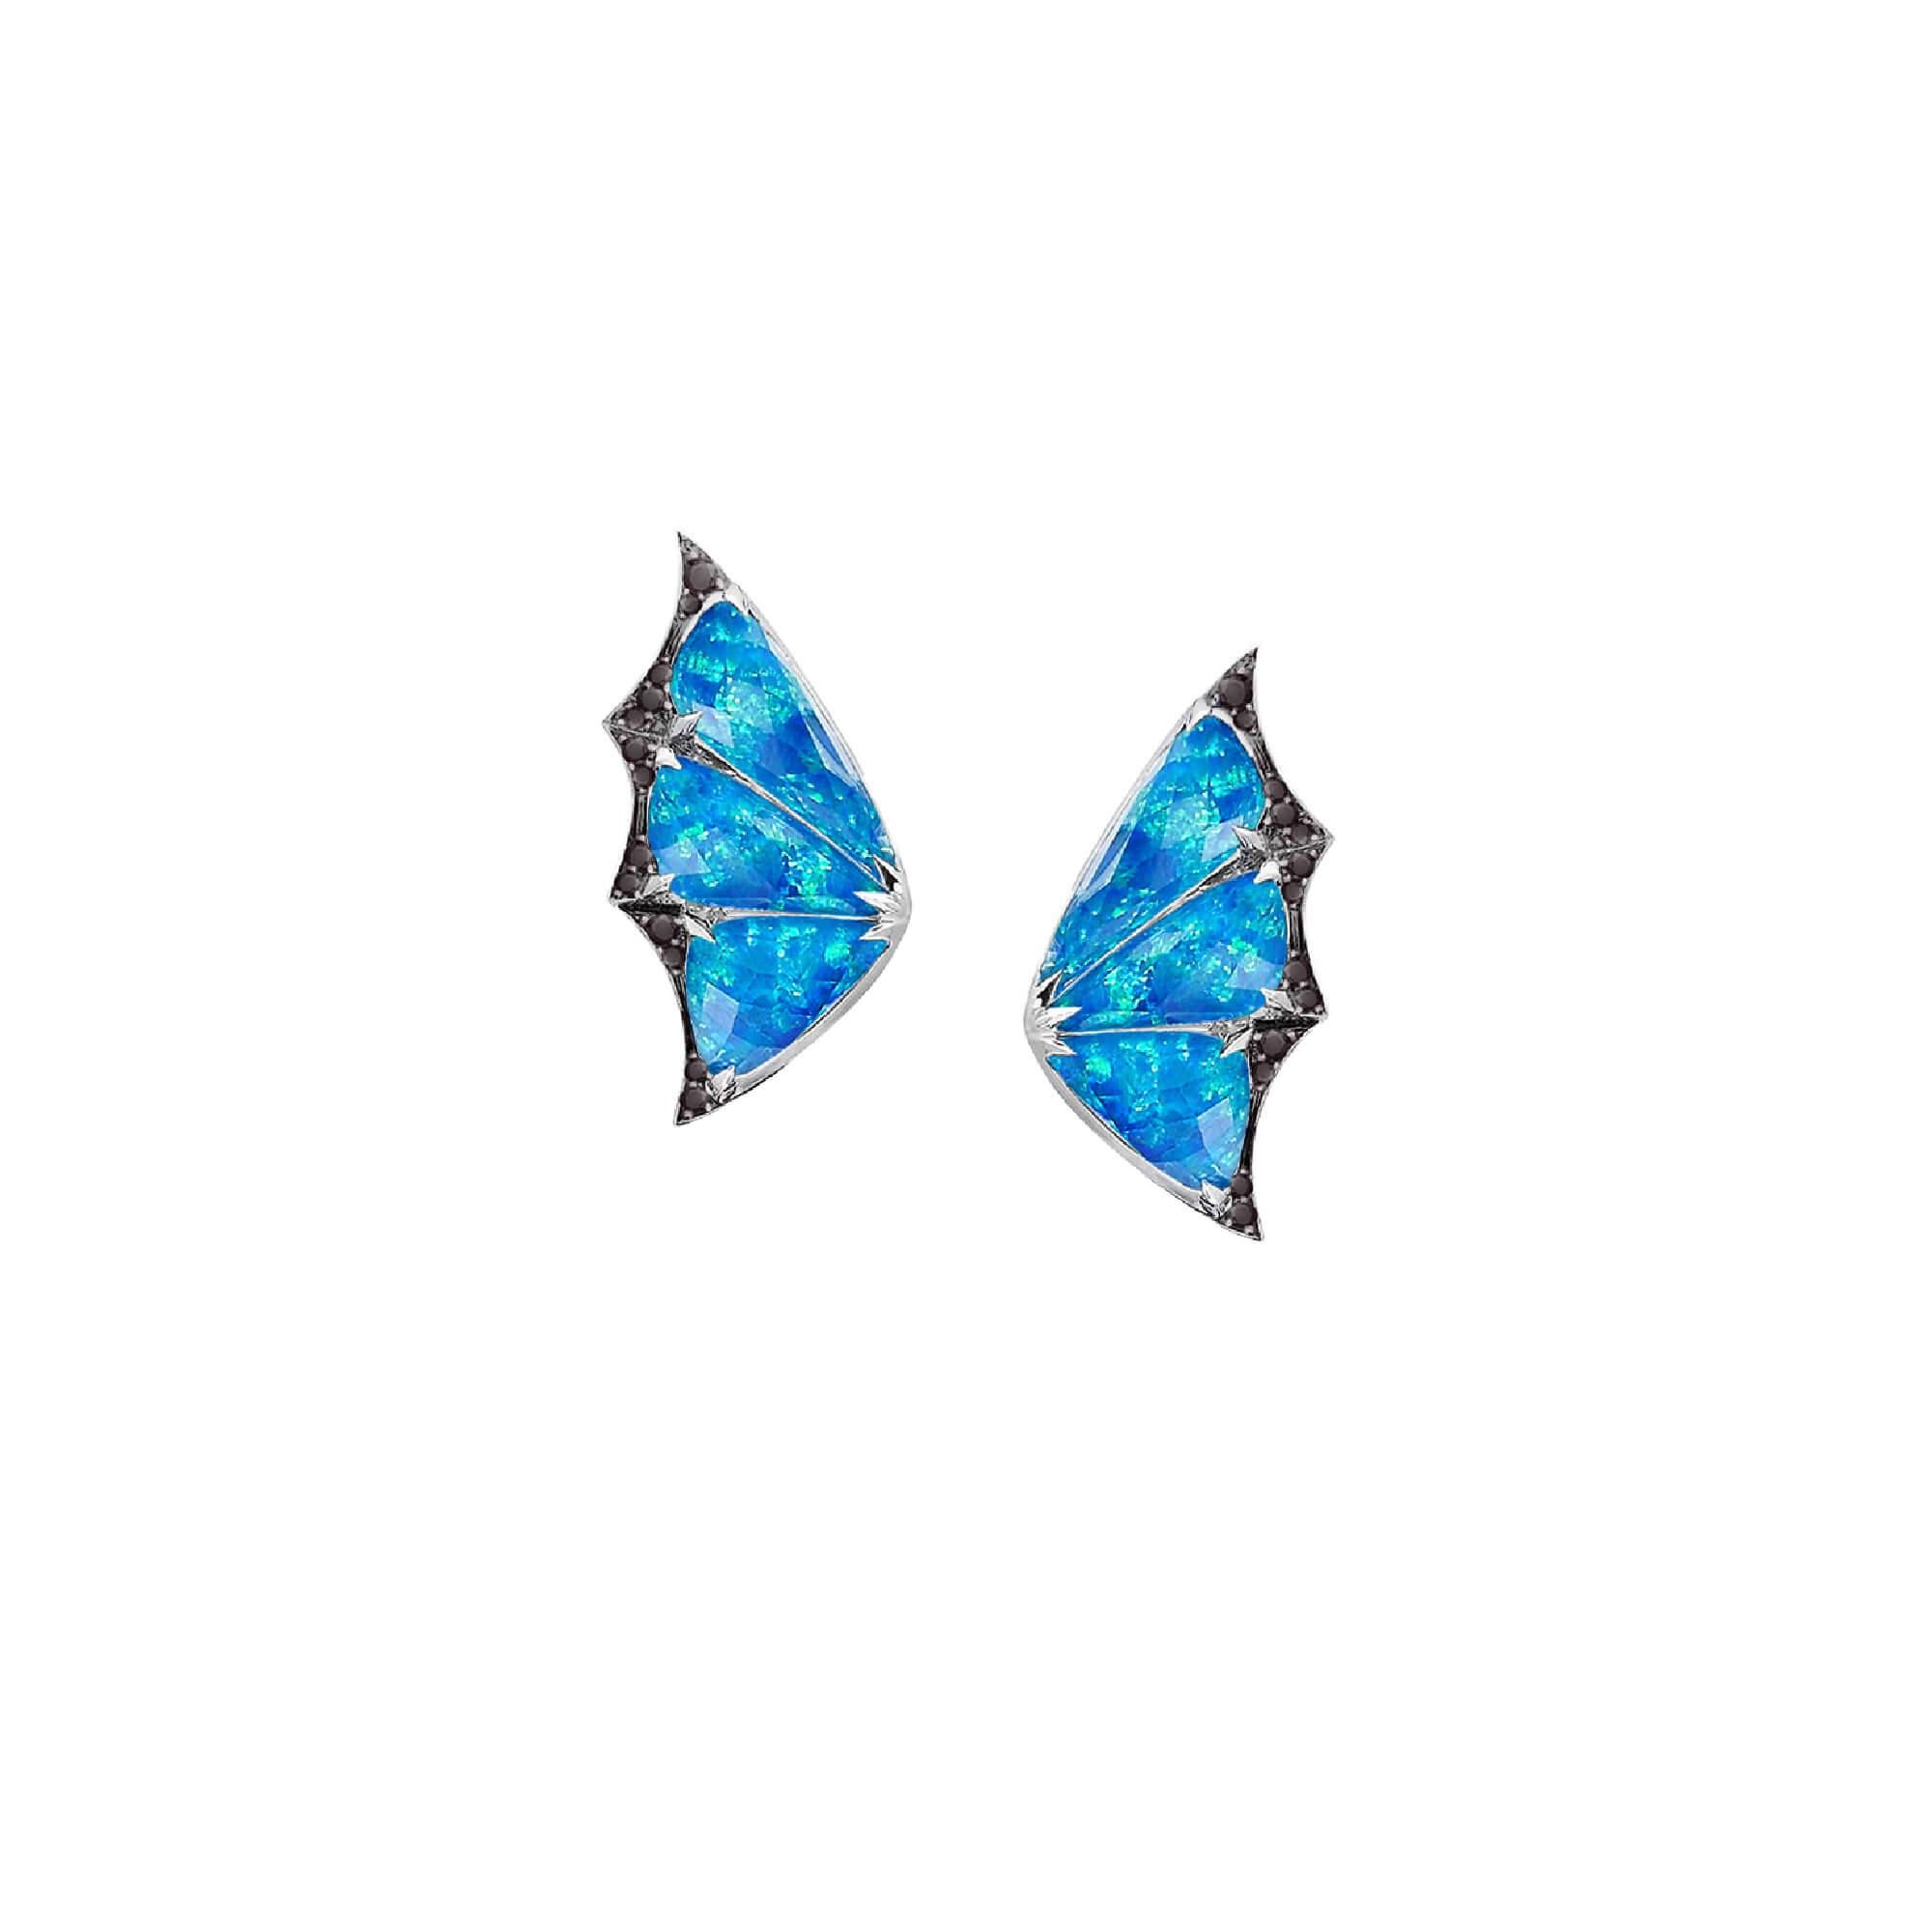 The winged creatures that dwell in dark forests inspire this pair of 'Fly By Night' Crystal Haze Long Earrings. This pair of earrings are meticulously handcrafted in 18ct white gold, black opalescent with clear quartz Crystal Haze (8.43ct), 1.59ct